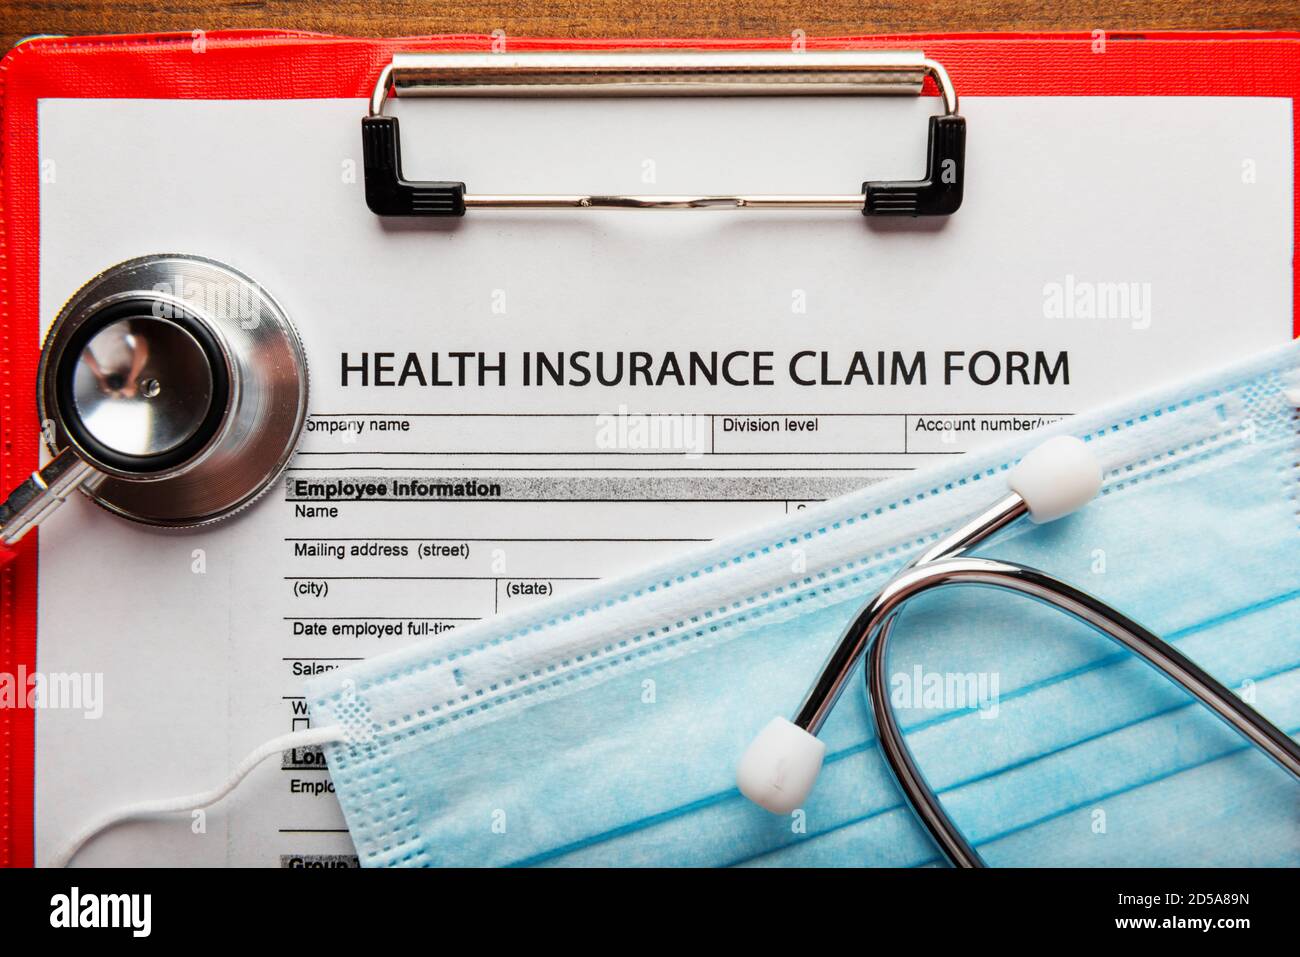 Health insurance claim form with stethoscope and surgical mask, top view Stock Photo